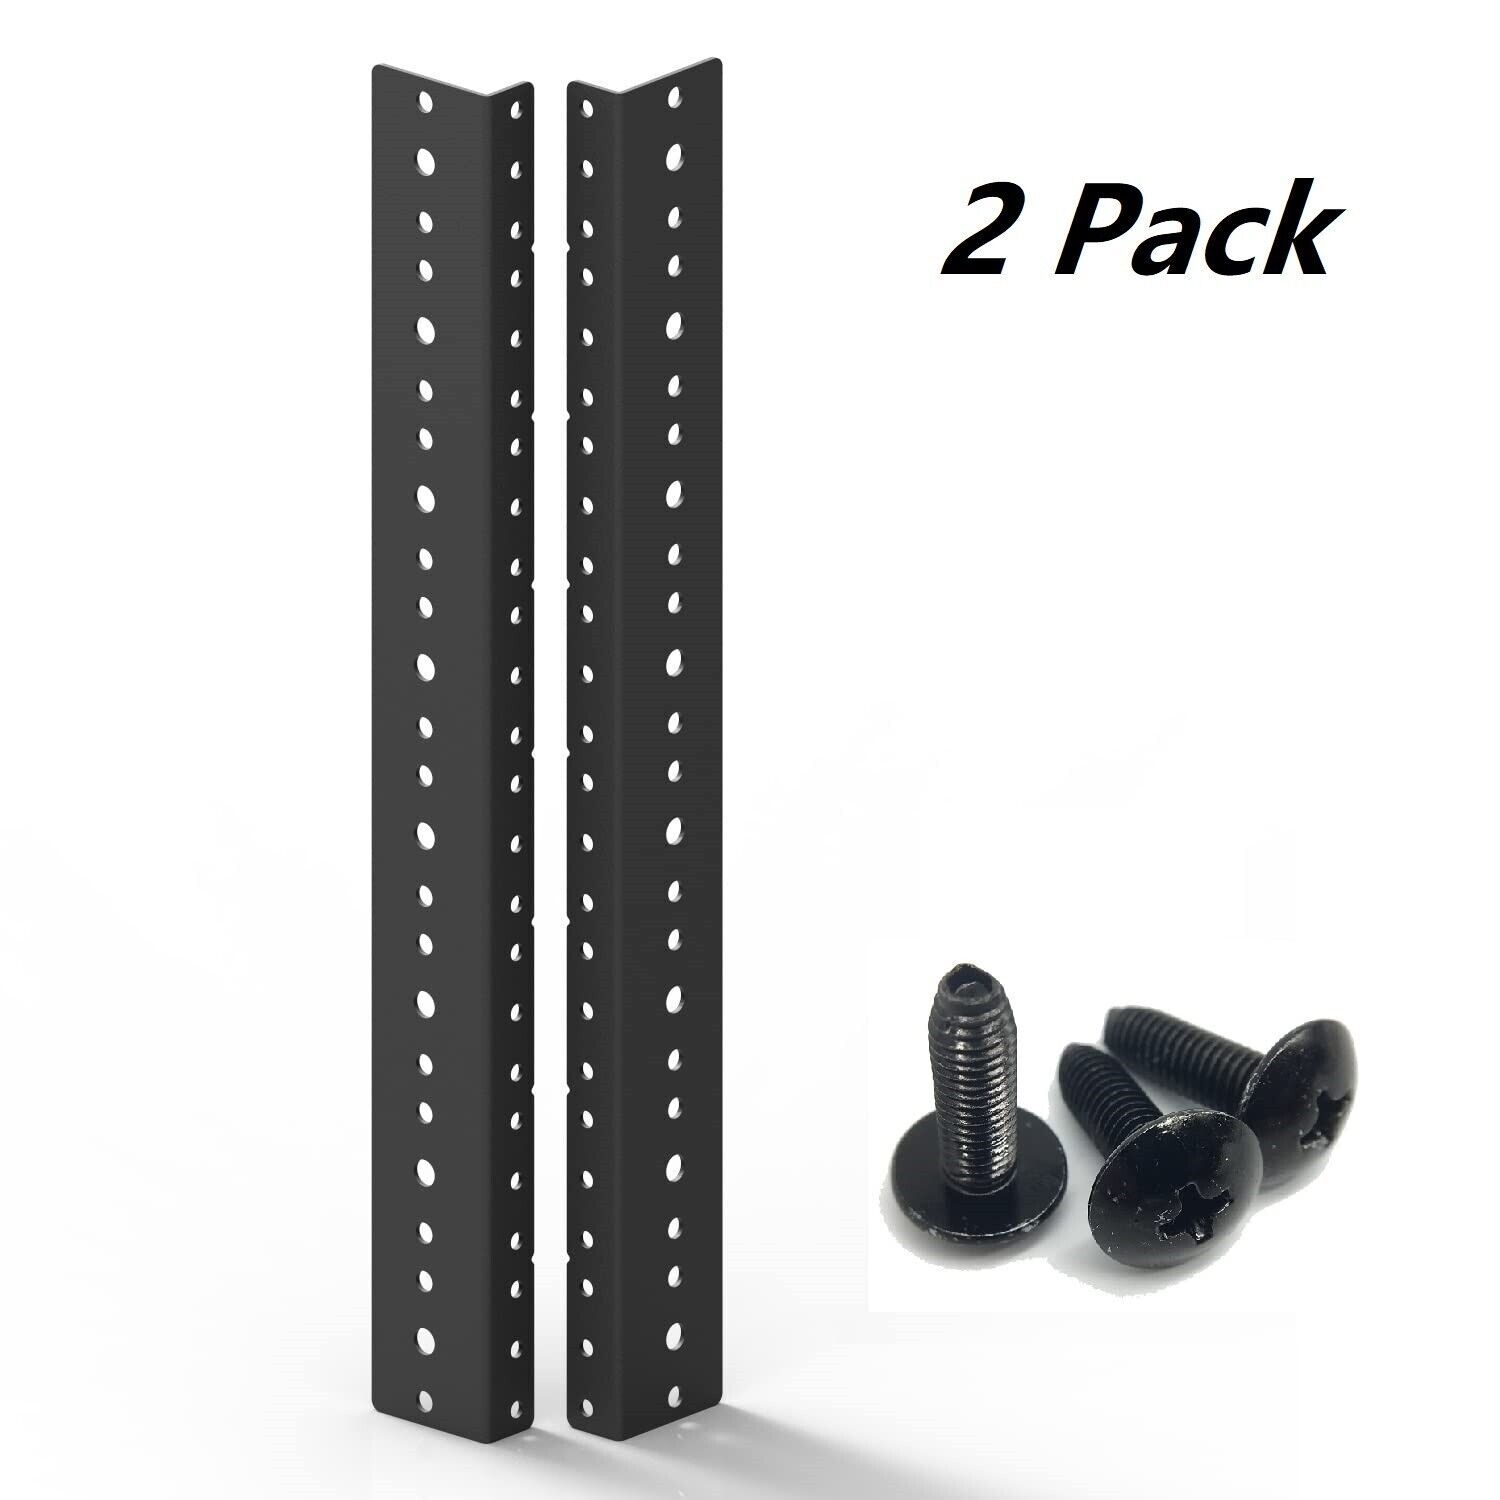 2 Pack of 8U Rack Rails Kit with Hardware - 2 Pieces (8URR)